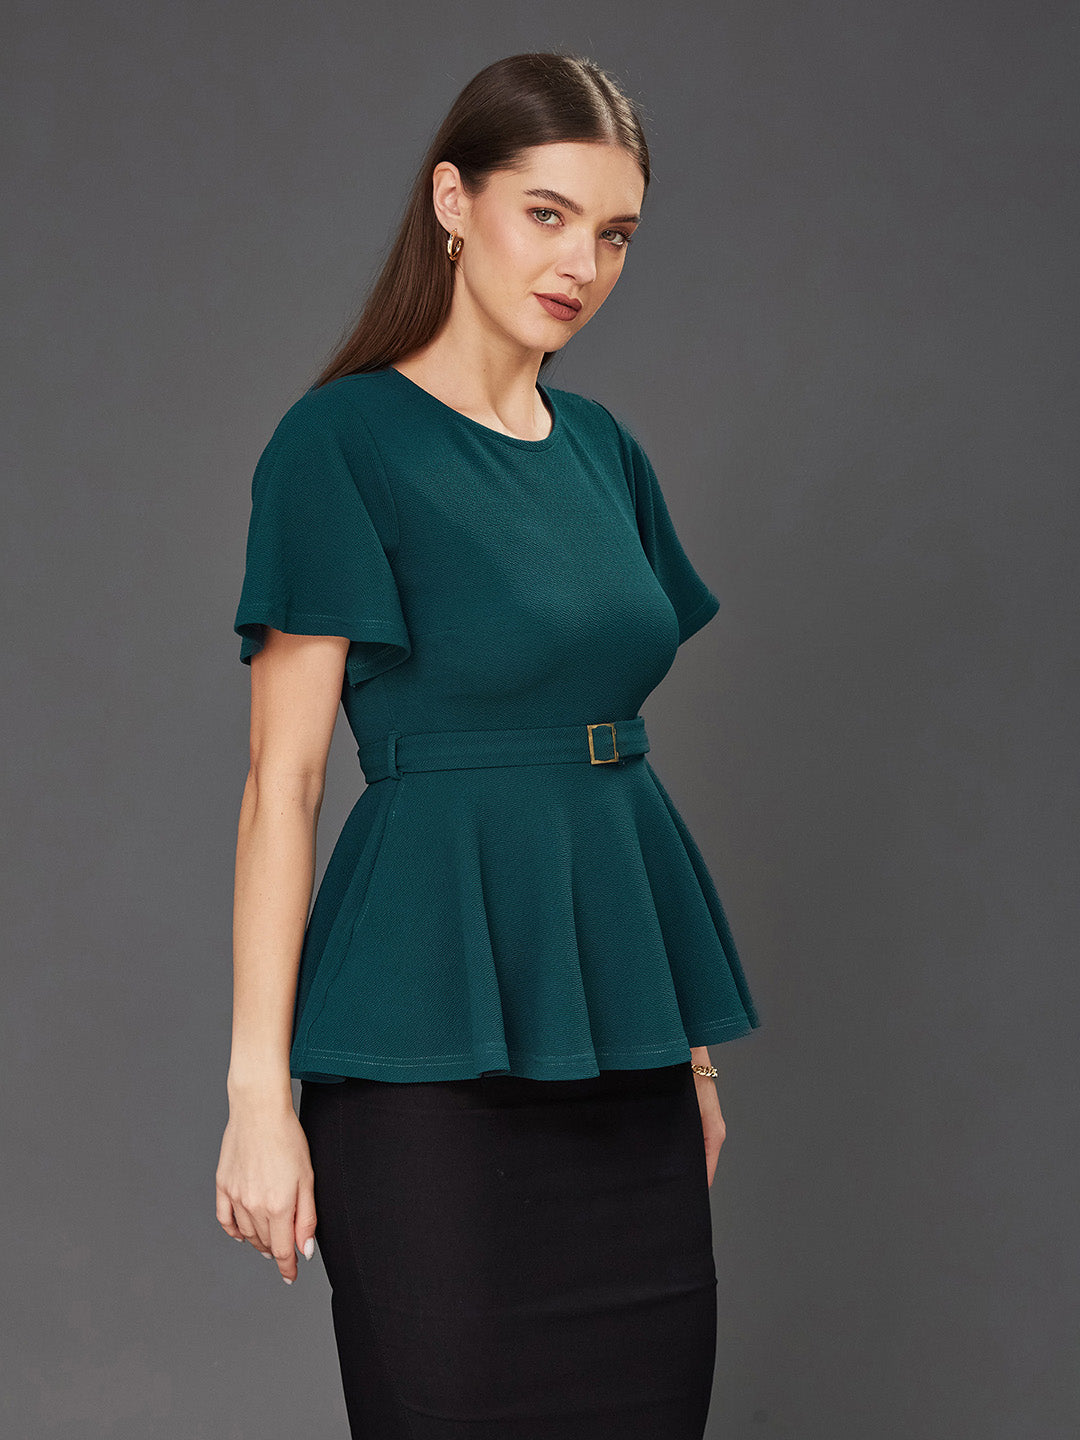 Women's Green Solid Polyester Slim Fit Round Neck Short Sleeve Regular Length Top